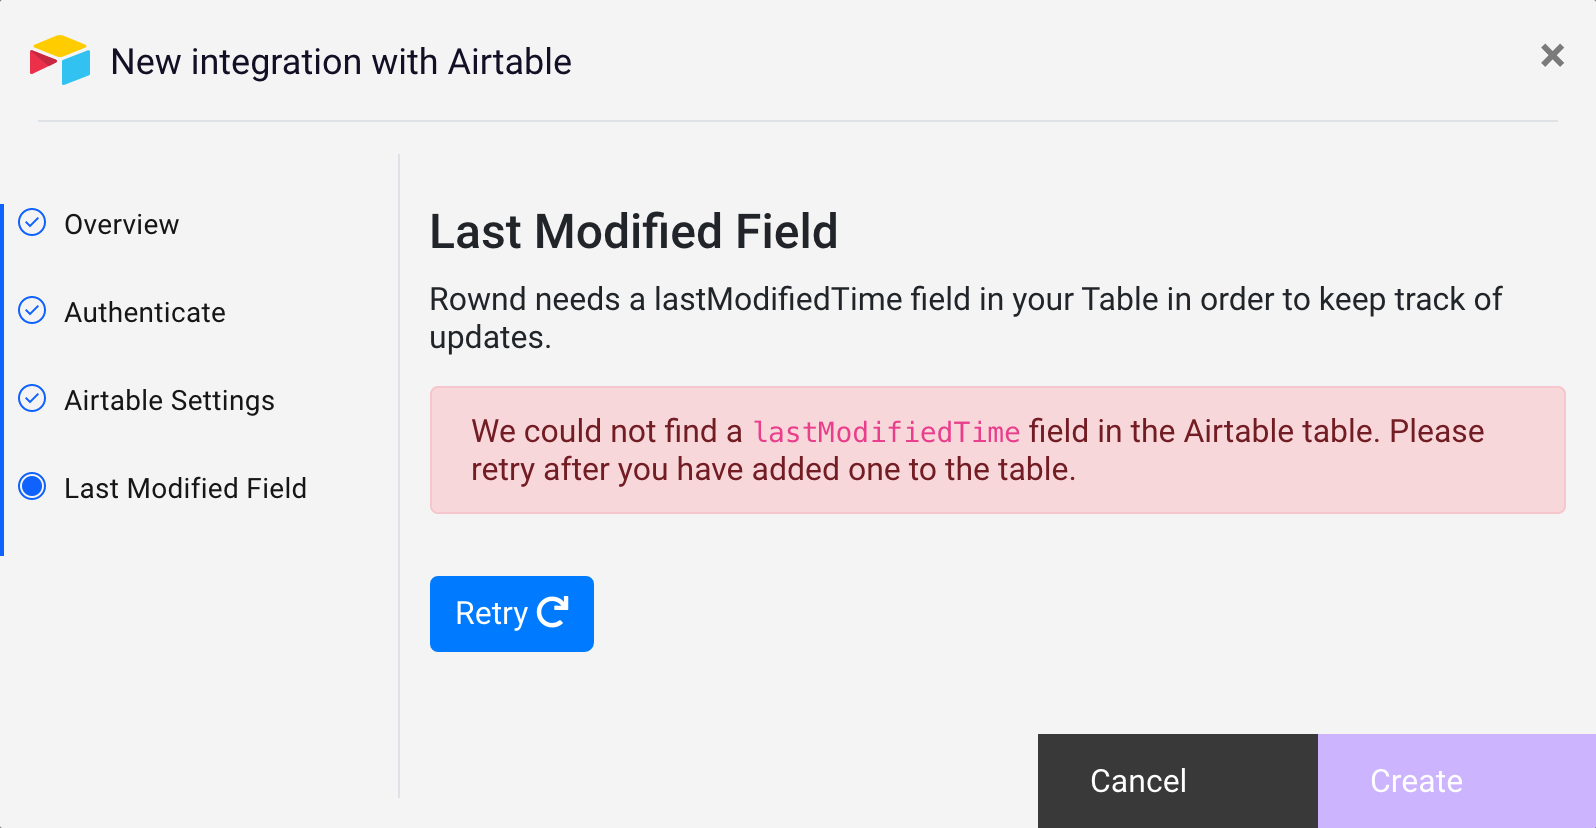 Last Modified Time Field not found